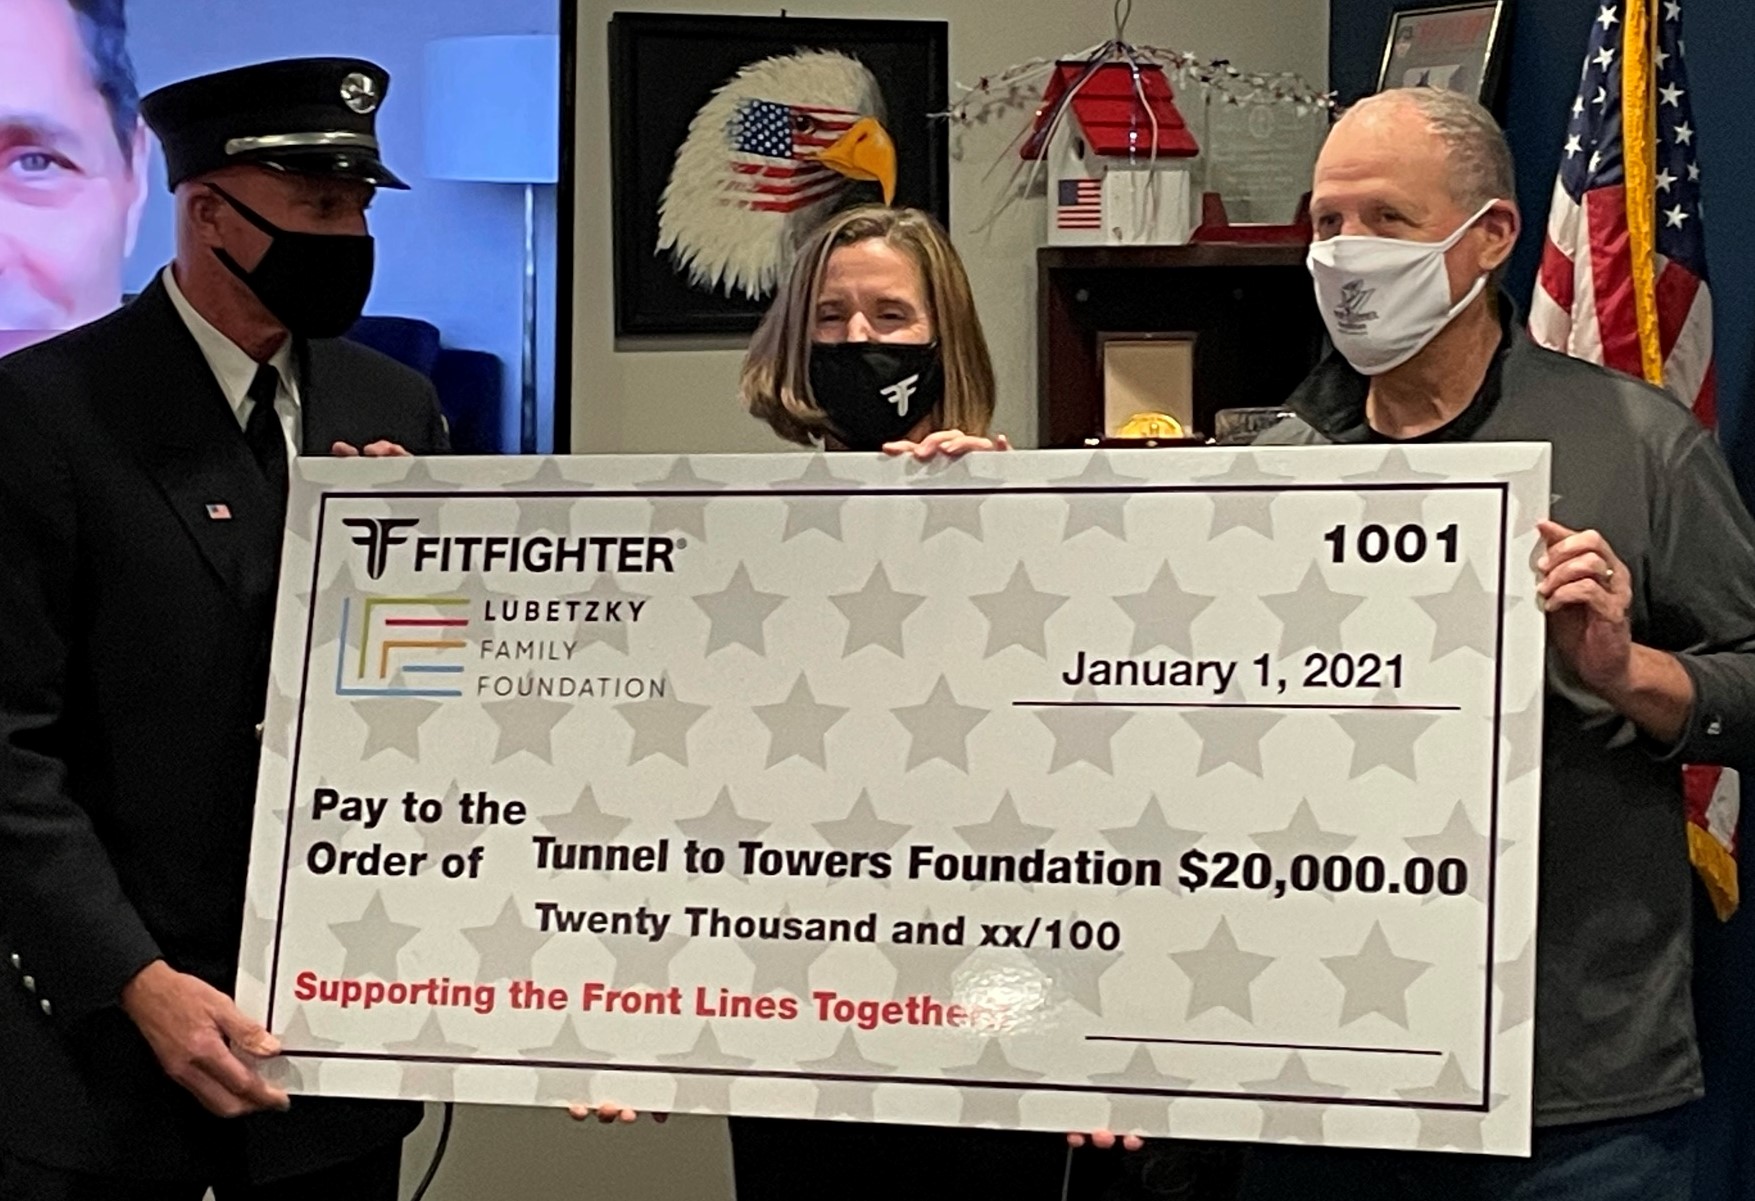 Fitfighter and Shark Tank's Daniel Lubetzky Donate $20,000 to Tunnel to Towers